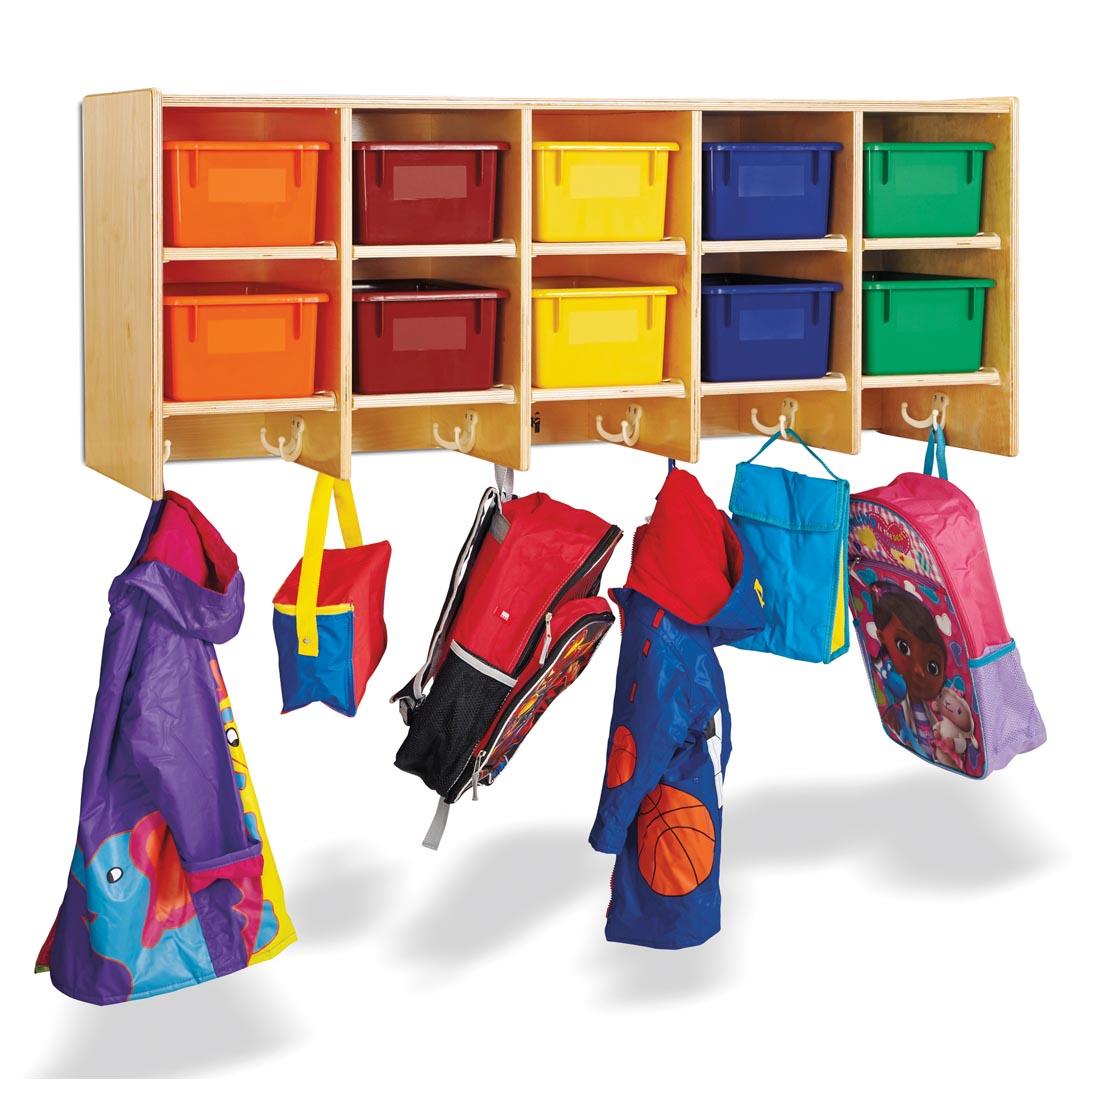 lunch boxes, backpacks and raincoats hanging from the Wall Mounted Coat Locker With Colored Trays